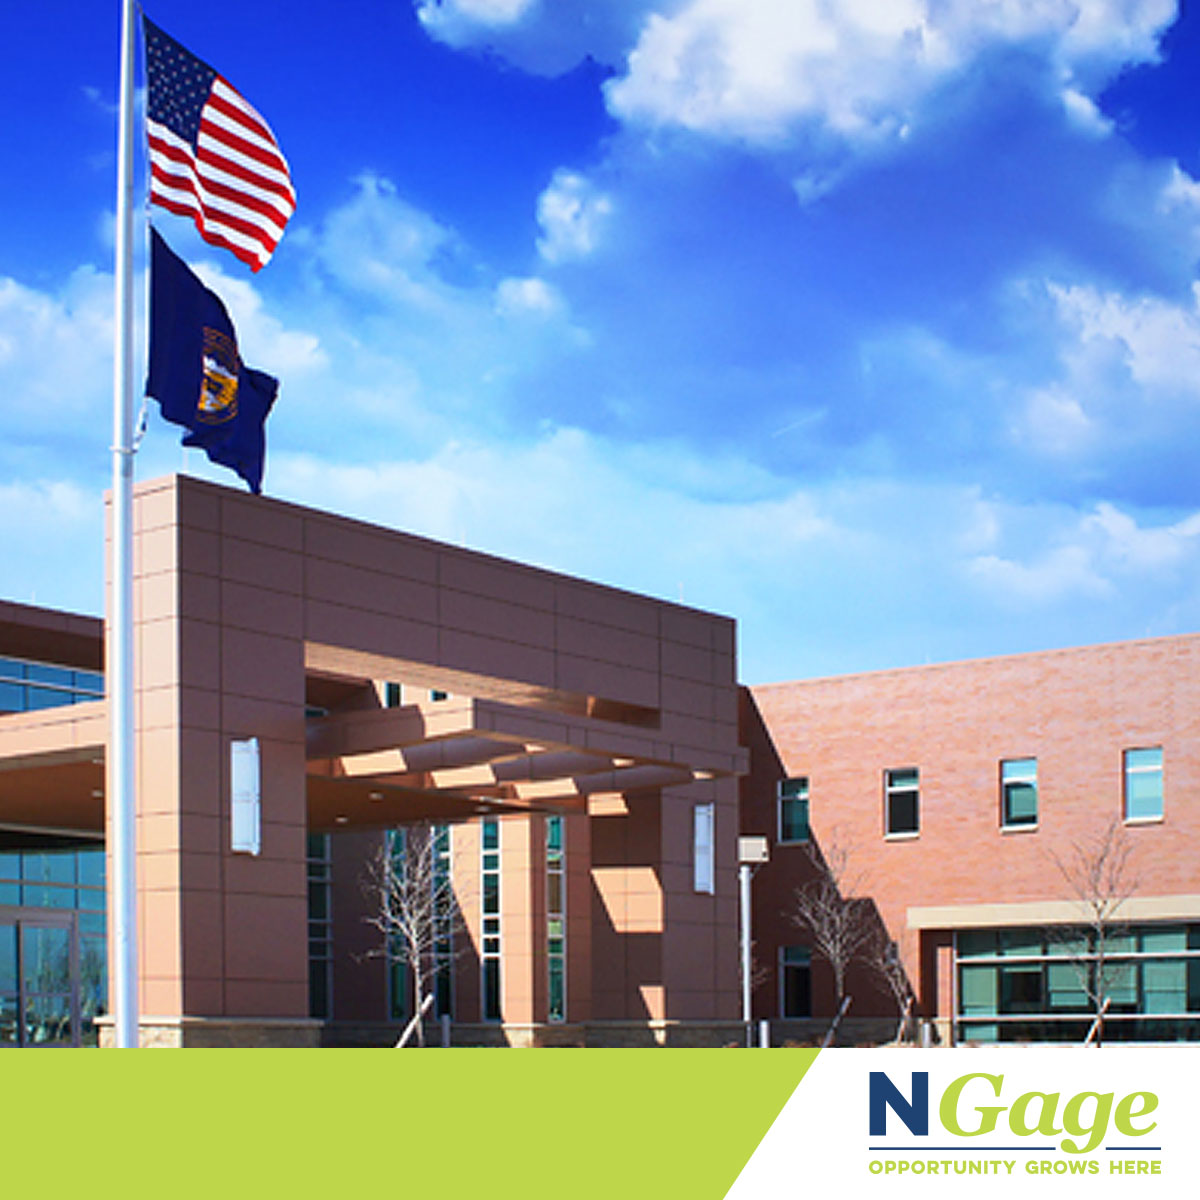 Click the $13 Million Hospital Expansion in Beatrice, Gage County, NE Slide Photo to Open